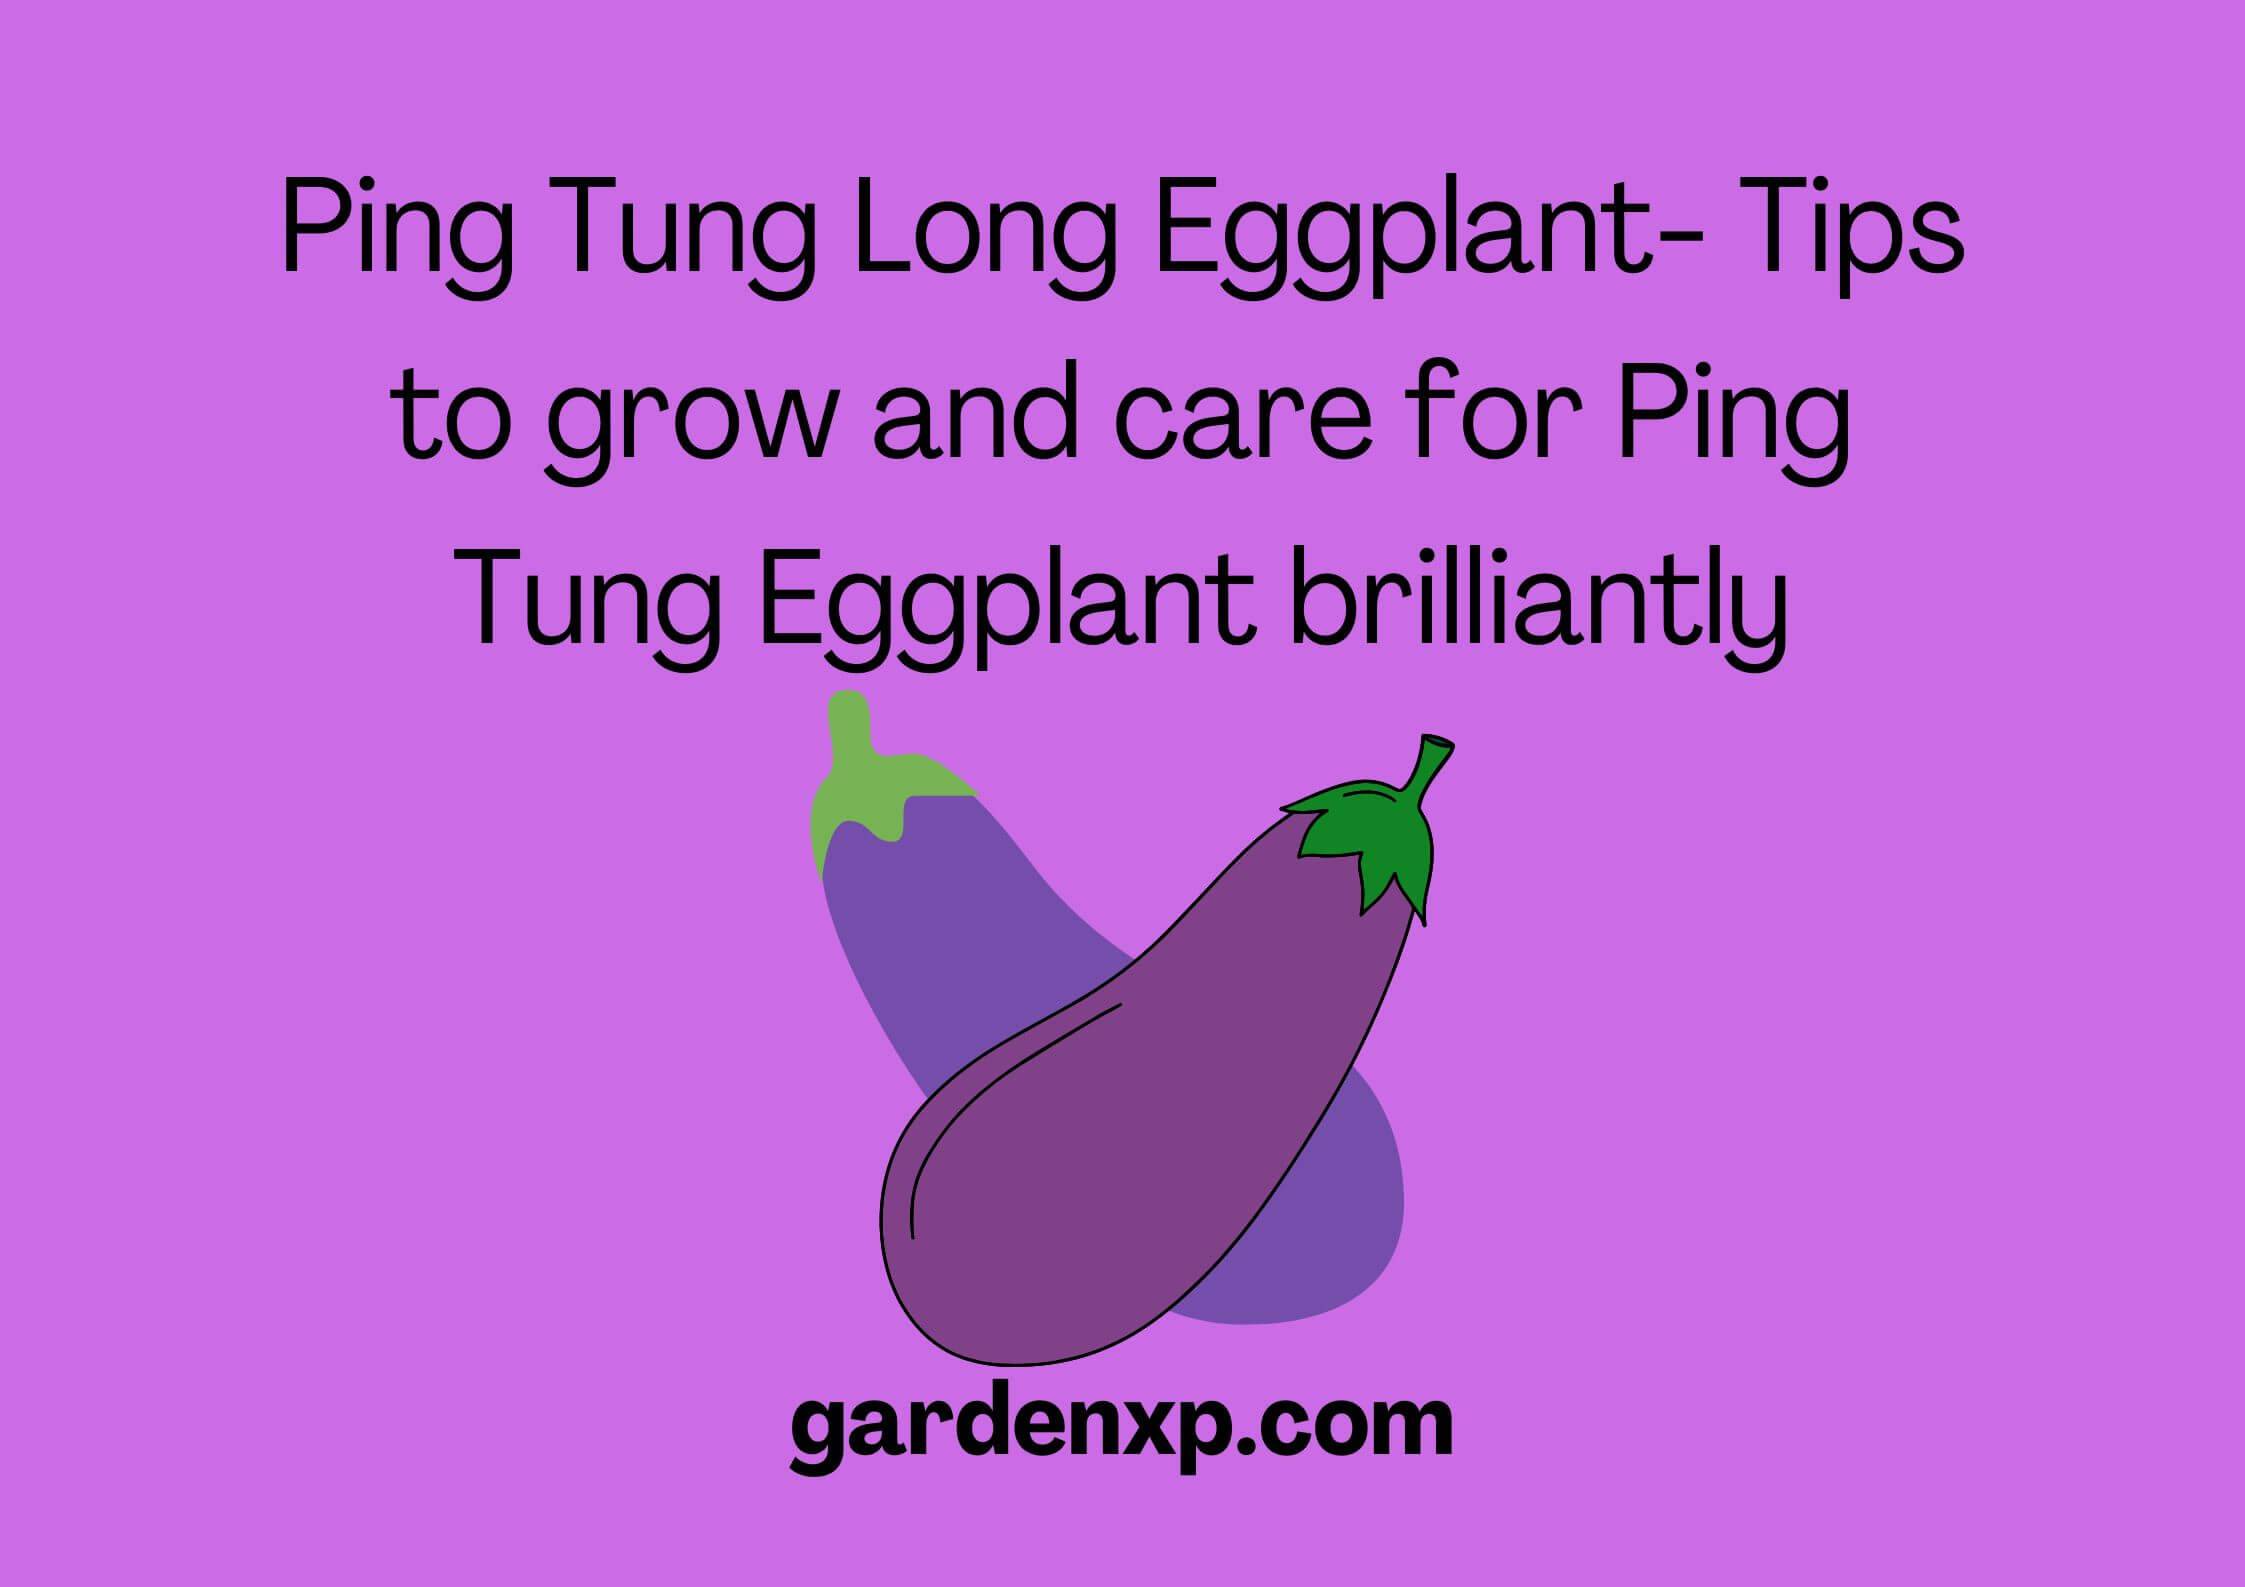 Ping Tung Egg Plant - How to grow and care for Ping Tung Egg Plant?